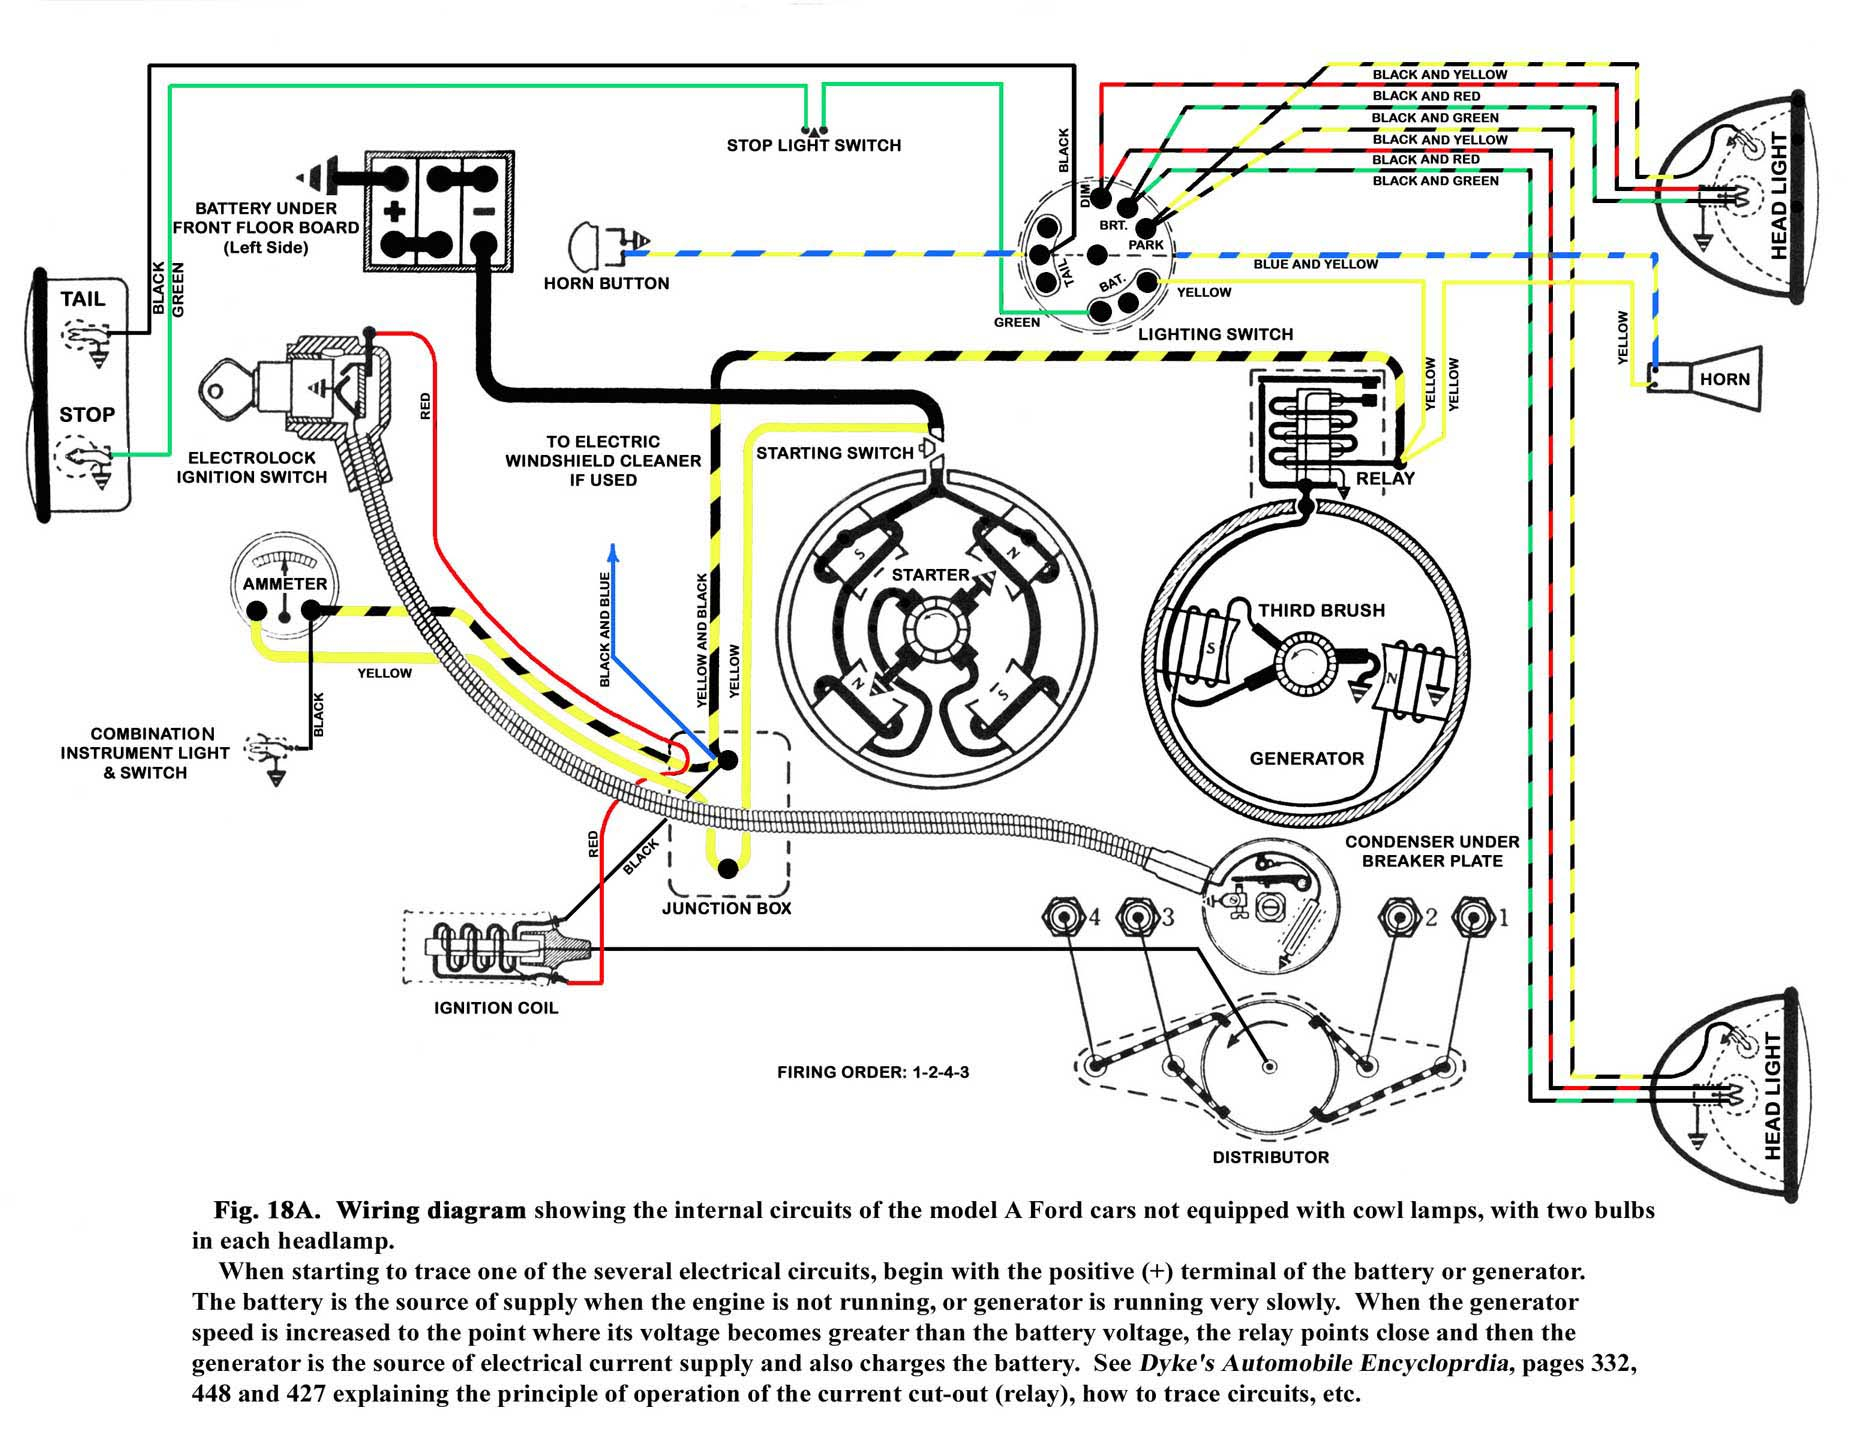 Model A Ford Coil Wiring - Wiring Diagram Detailed - Ford Ignition Coil Wiring Diagram